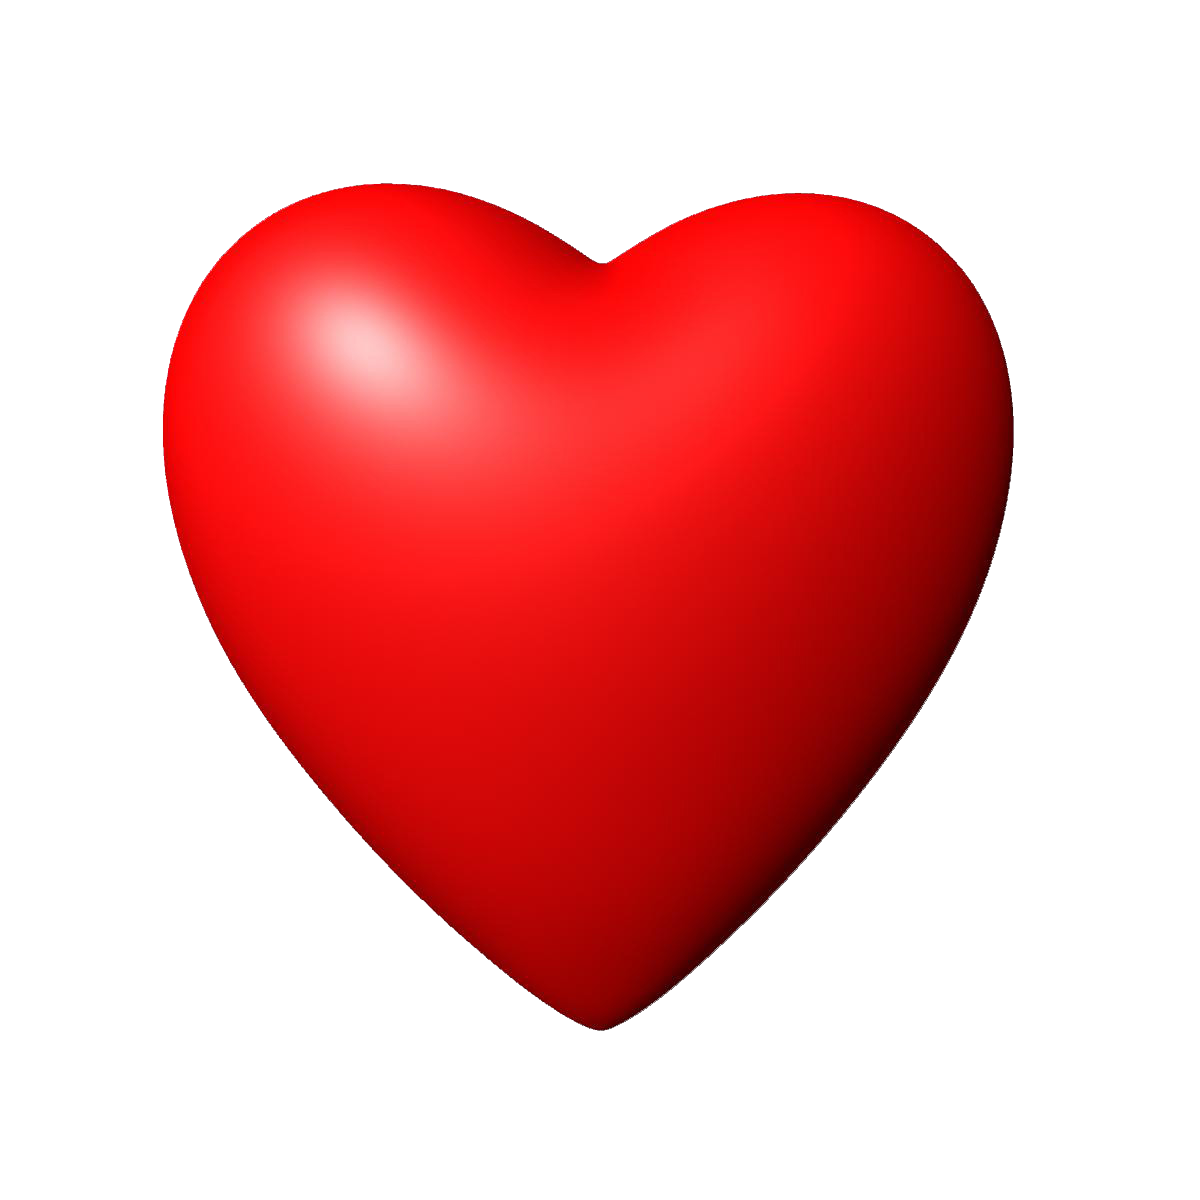 3D Red Heart Image PNG Image